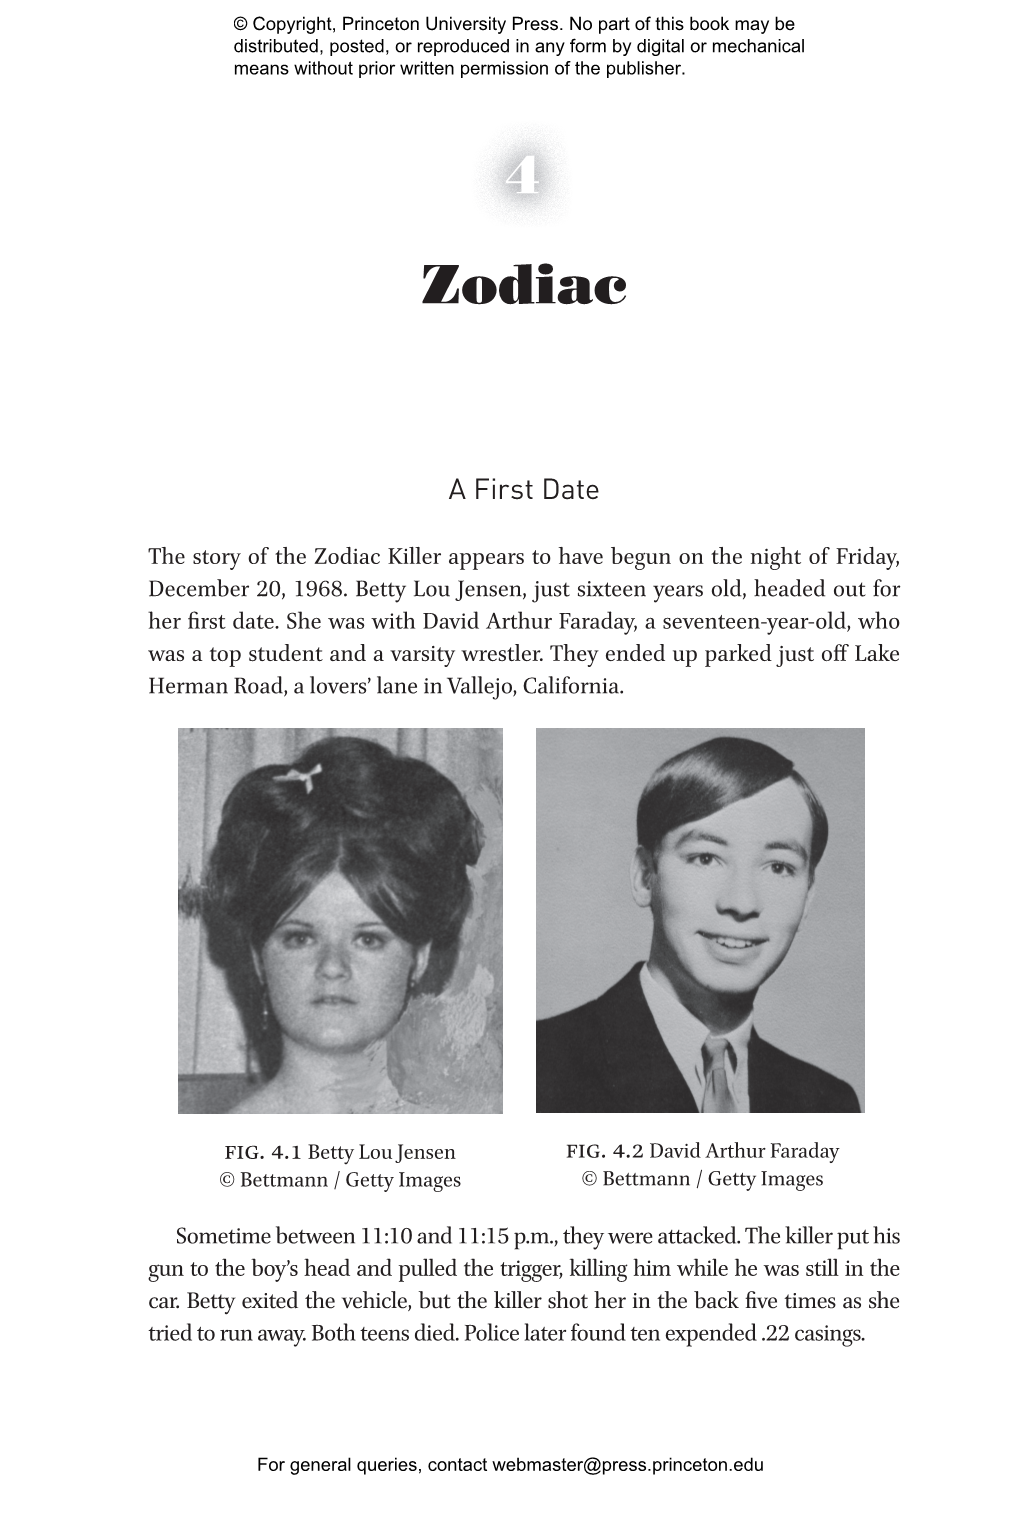 Zodiac Killer Appears to Have Begun on the Night of Friday, December 20, 1968